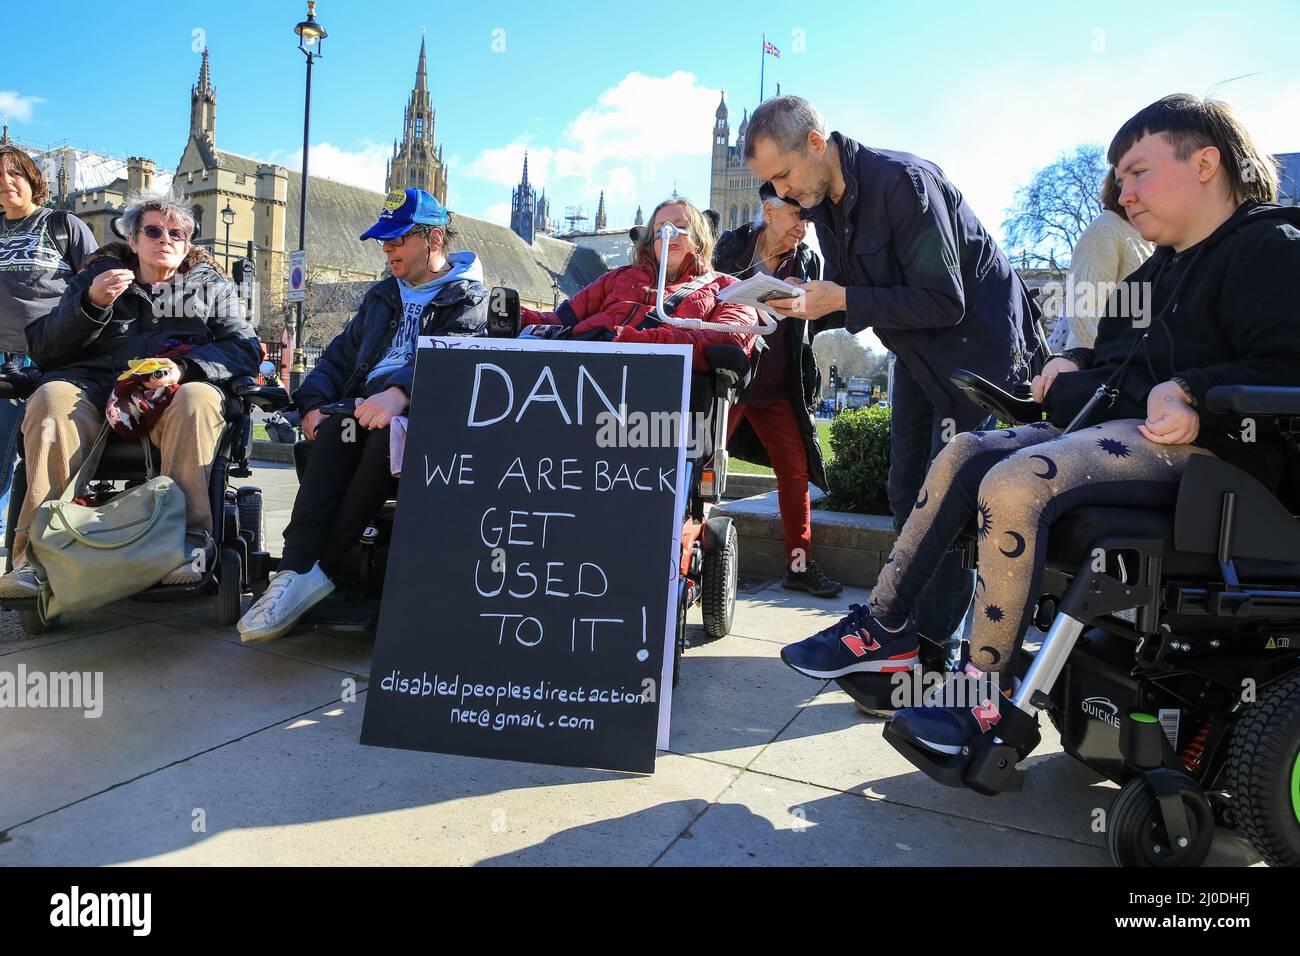 London, UK. 18th Mar, 2022. Protesters on Parliament Square. A rally organised by the Disabled People's Direct Action Networks see people protesting against what they perceive as a failure by government to protect disabled people adequately during the ongoing covid pandemic. Credit: Imageplotter/Alamy Live News Stock Photo